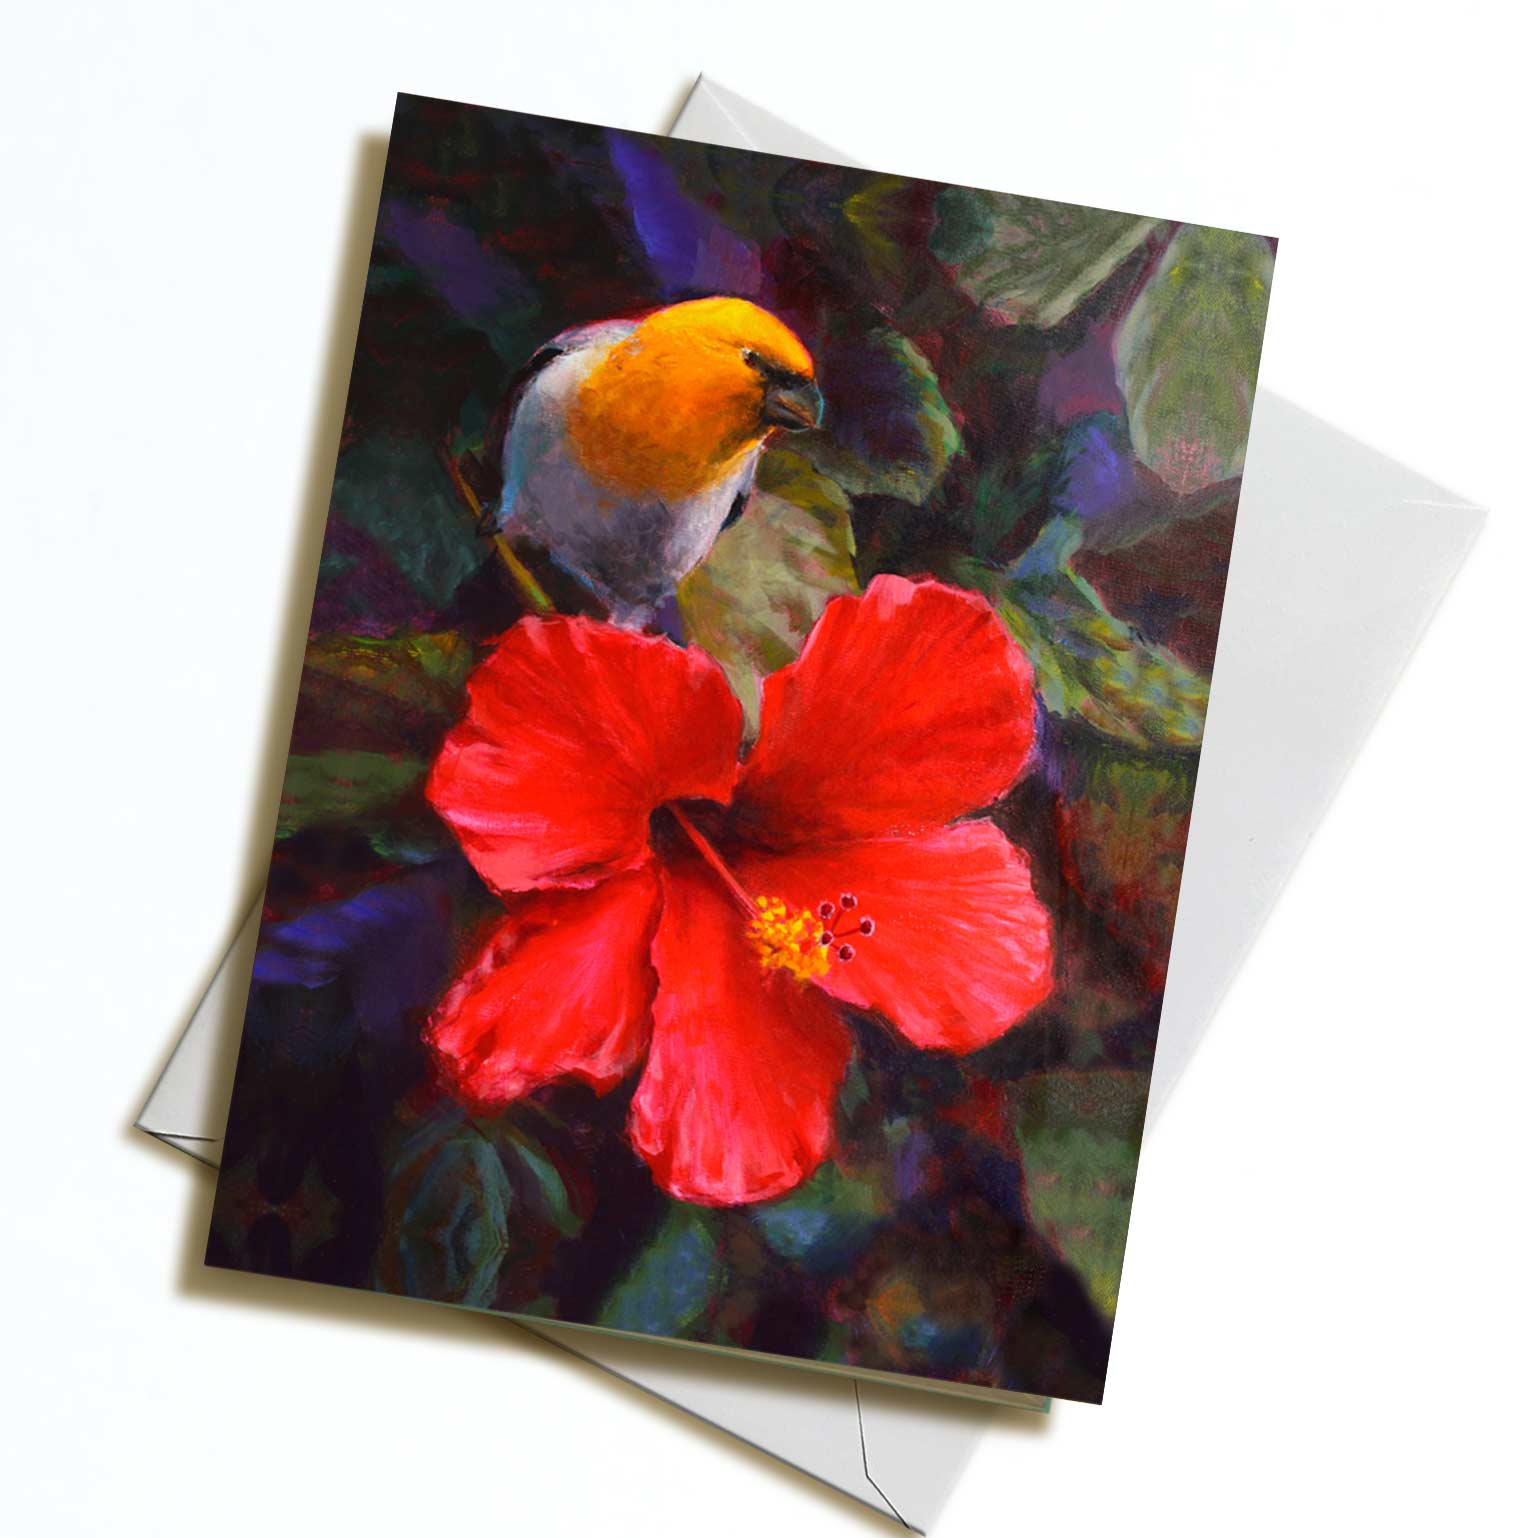 An envelope and card featuring art of a tropical Hawaiian Hibiscus flower and an endemic Palila bird on white background